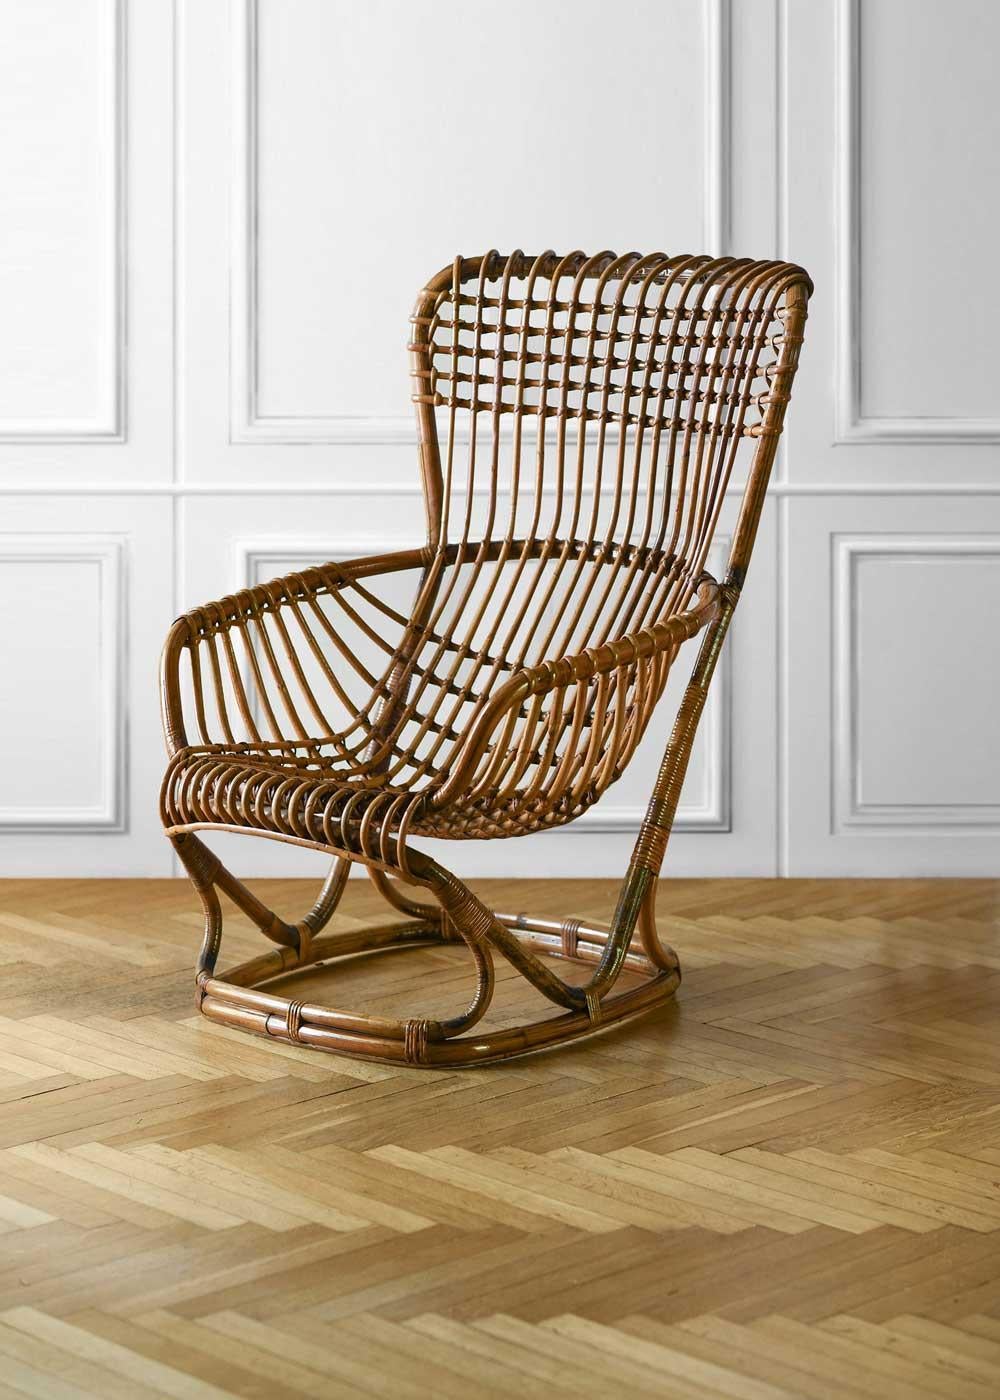 Living room armchair by Tito Agnoli for Bonacina, Italy 1960
Product details
Dimensions: 70 L x 100 H x 90 P cm
Materials: rattan
Manufacturer: Bonacina 1889
The armchair is supplied with a Bonacina Certificate of Authenticity